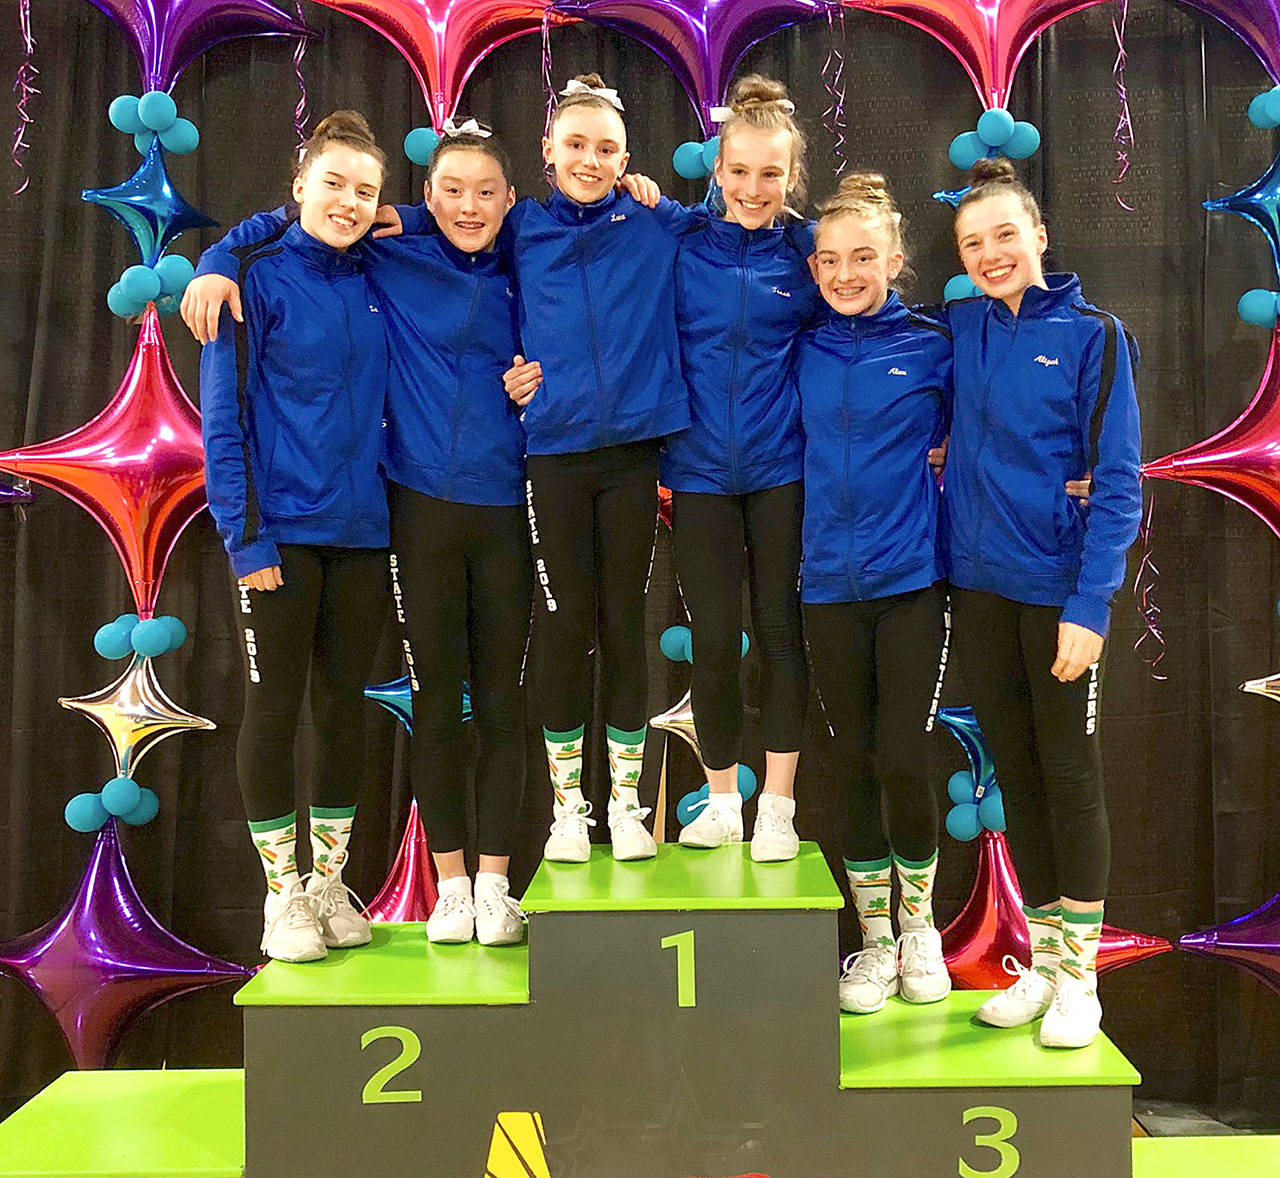 Twisters Gymnastics Level 7 team recently earned an eighth-place finish overall at the 2019 Washington Optional State Championships at Bonney Lake High School. Team members are, from left, Lia Poore, Rell Lennox, Luca Campbell, Tessa Richardson, Alexandria Schmadeke and Aliyah Yearian.